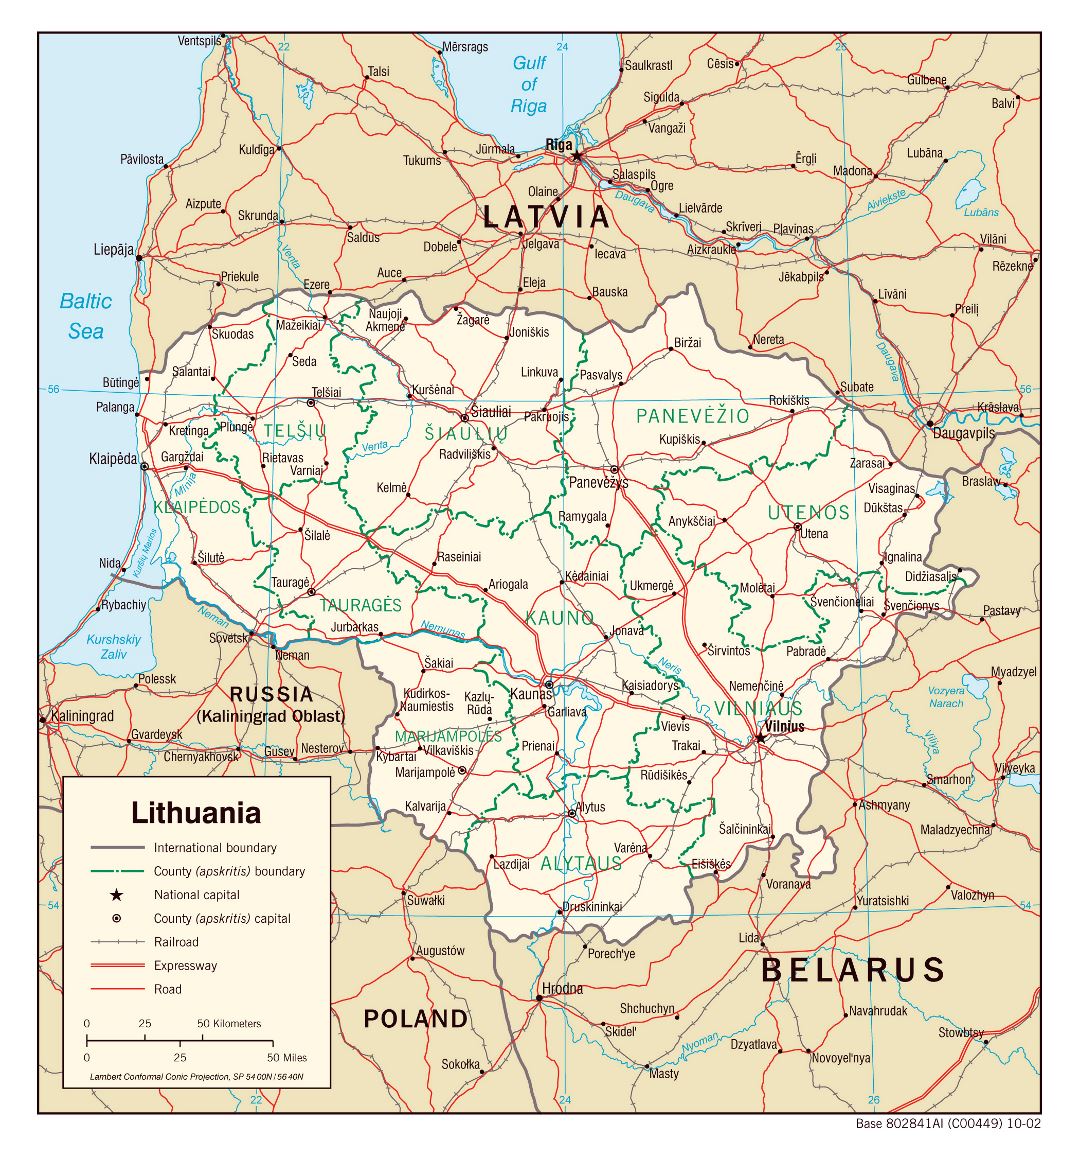 Large scale political and administrative map of Lithuania with roads, railroads and major cities - 2002